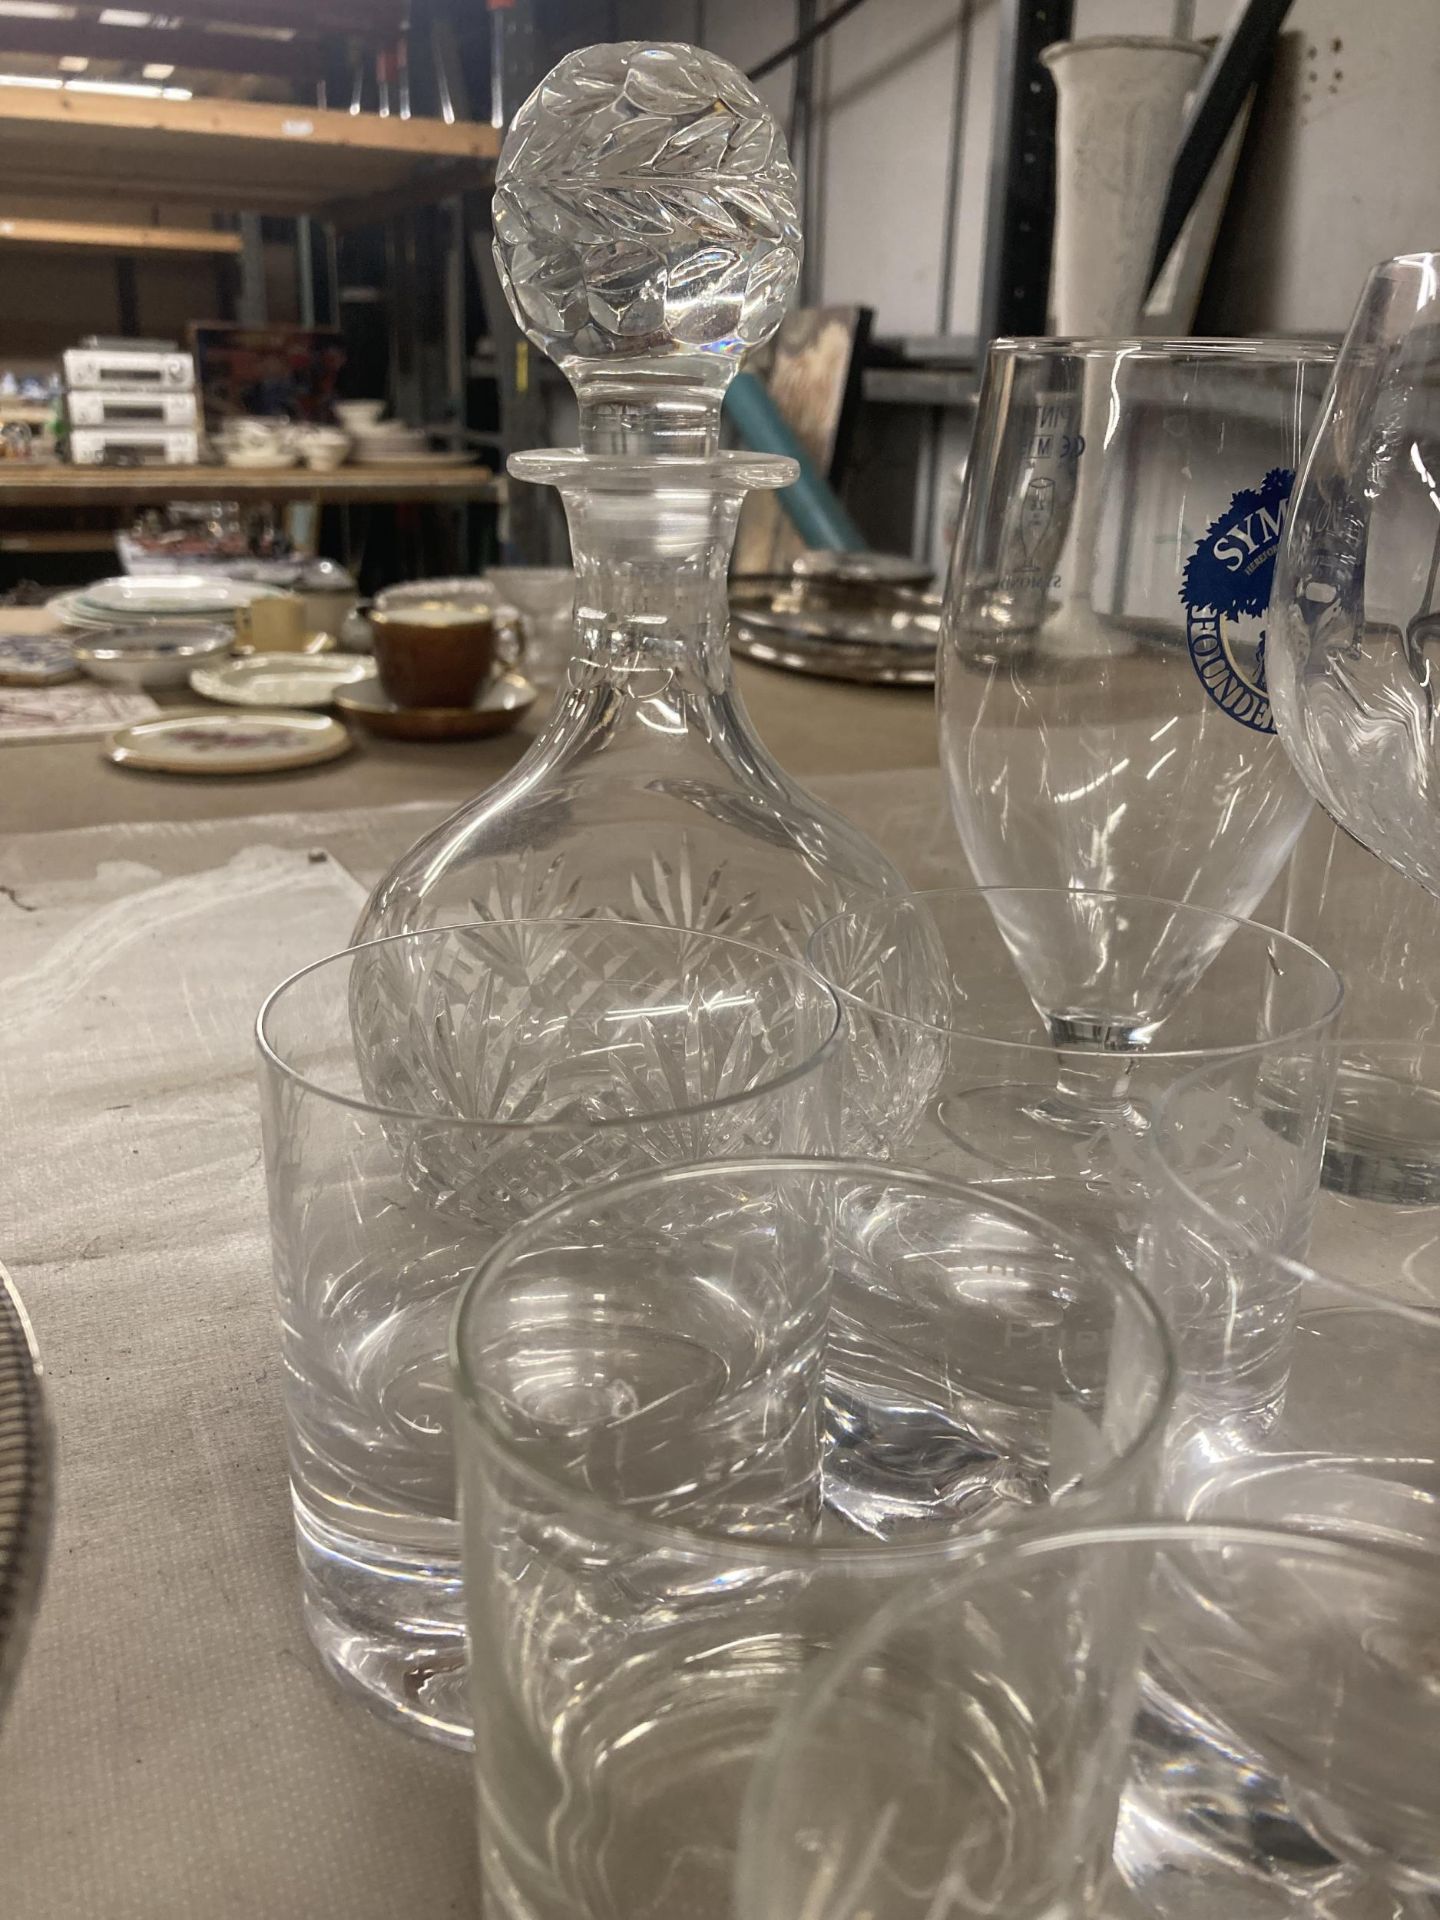 VARIOUS GLASSWARE TO INCLUDE A DECANTER, GIN GLASSES, TUMBLERS ETC - Image 2 of 5